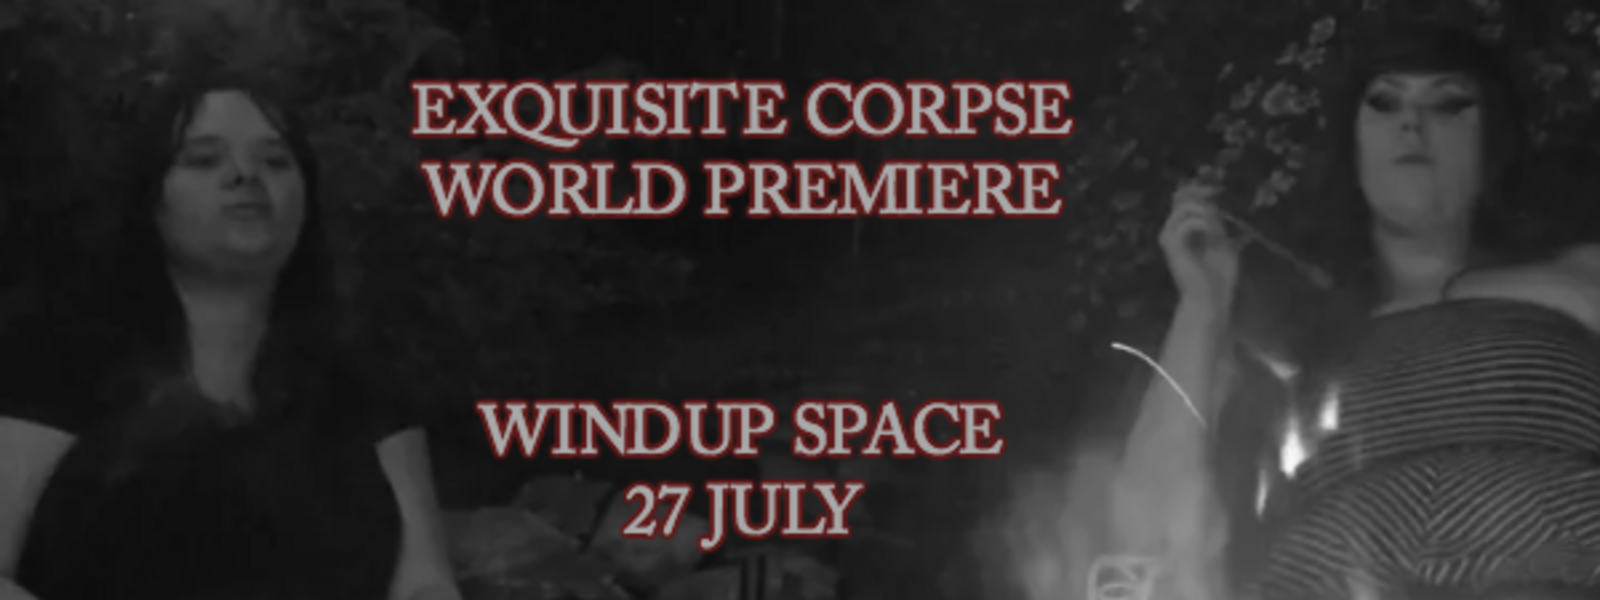 A banner ad for the premiere of Exquisite Corpse in July 2017